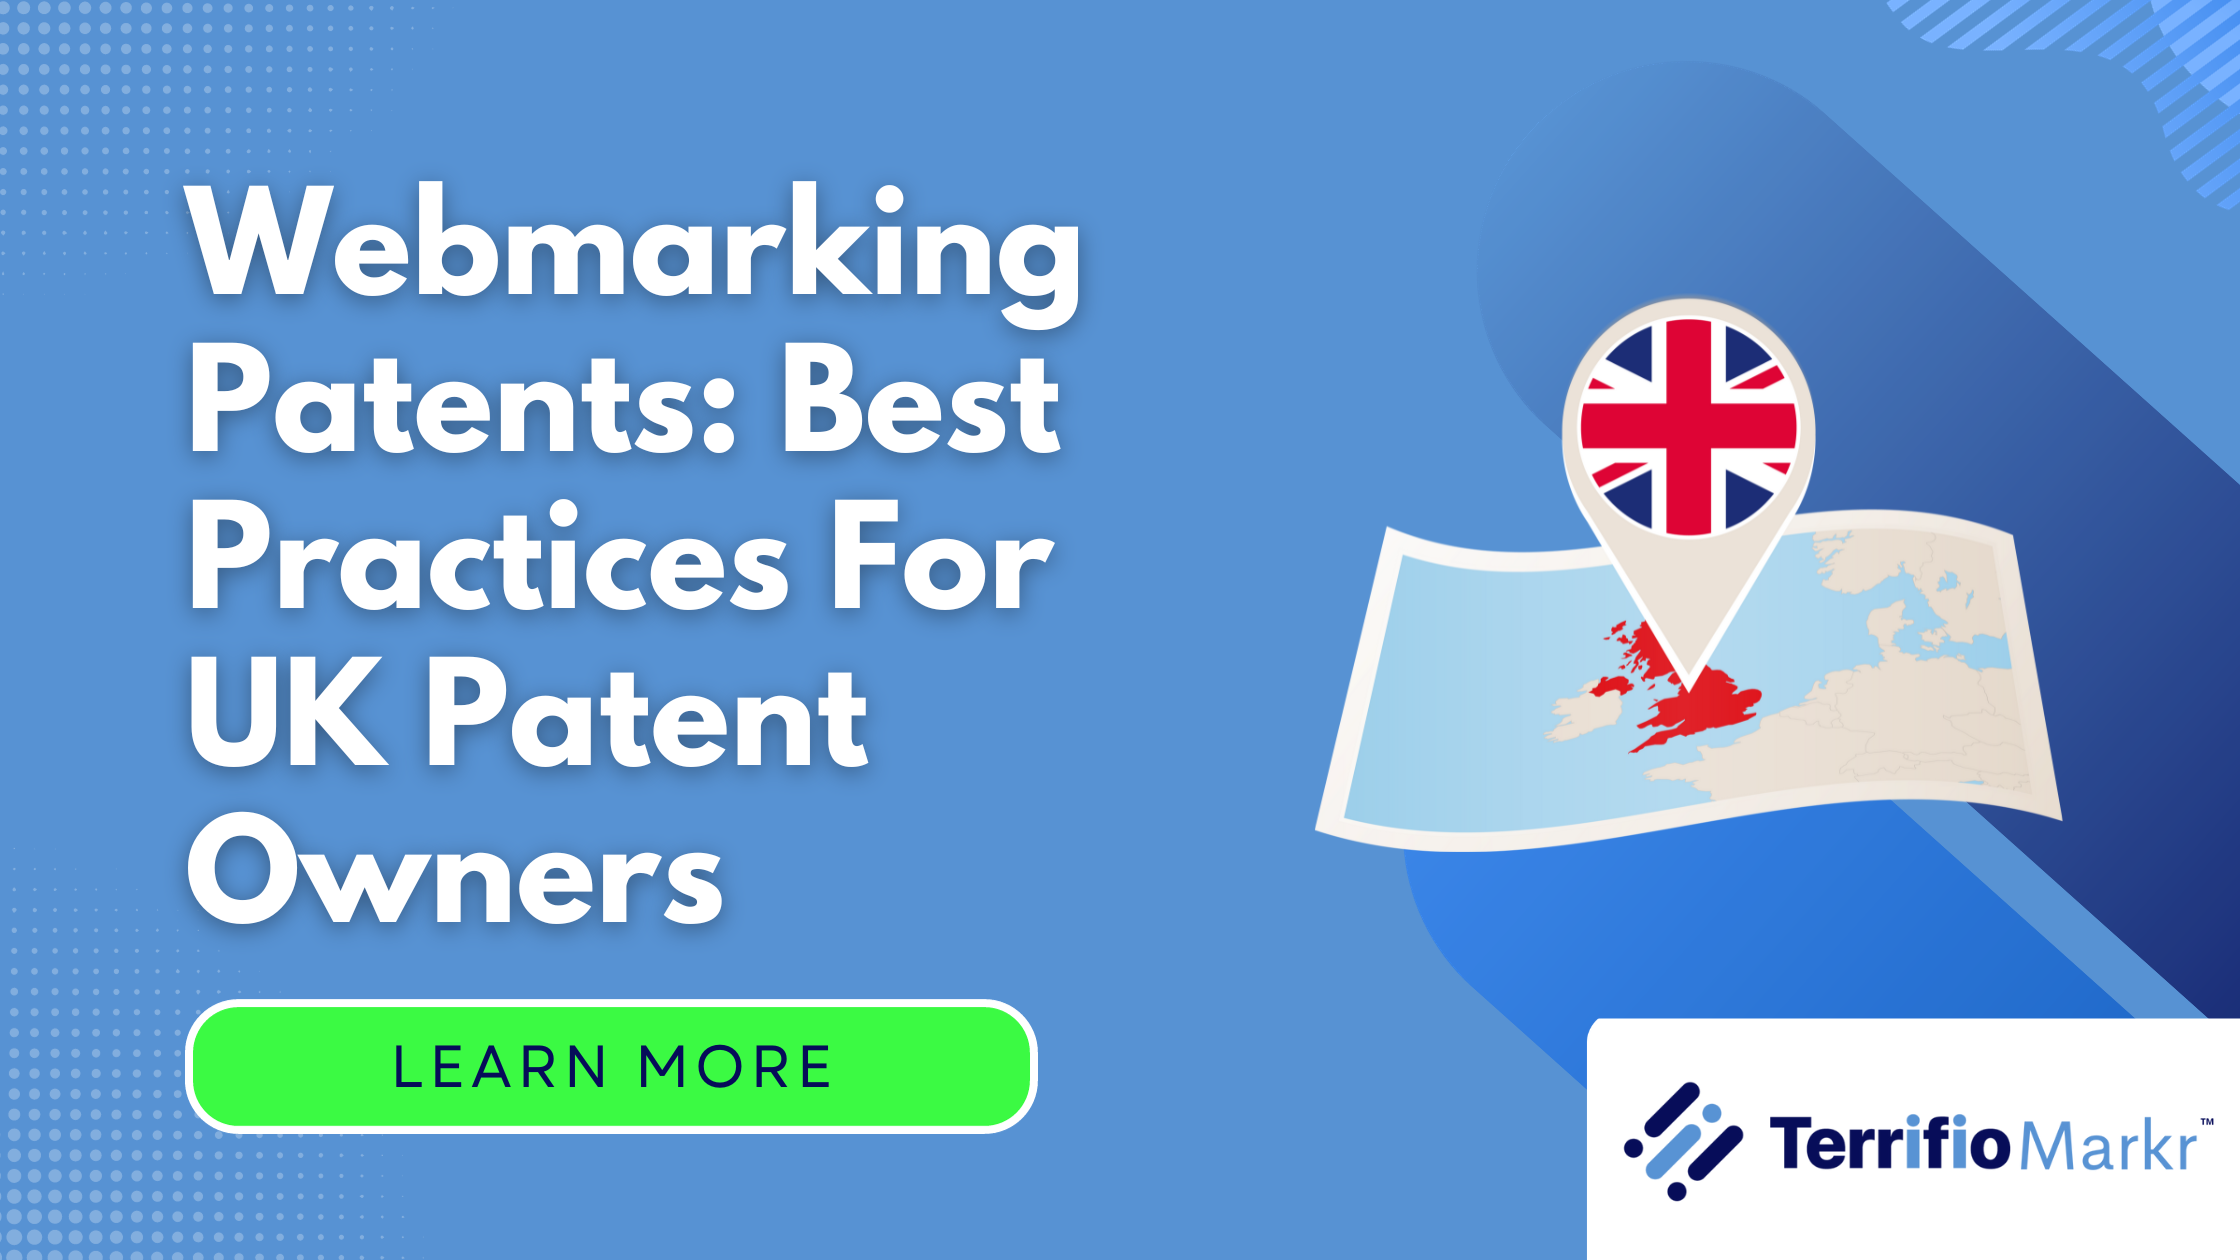 Webmarking Patents: Best Practices For UK Patent Owners